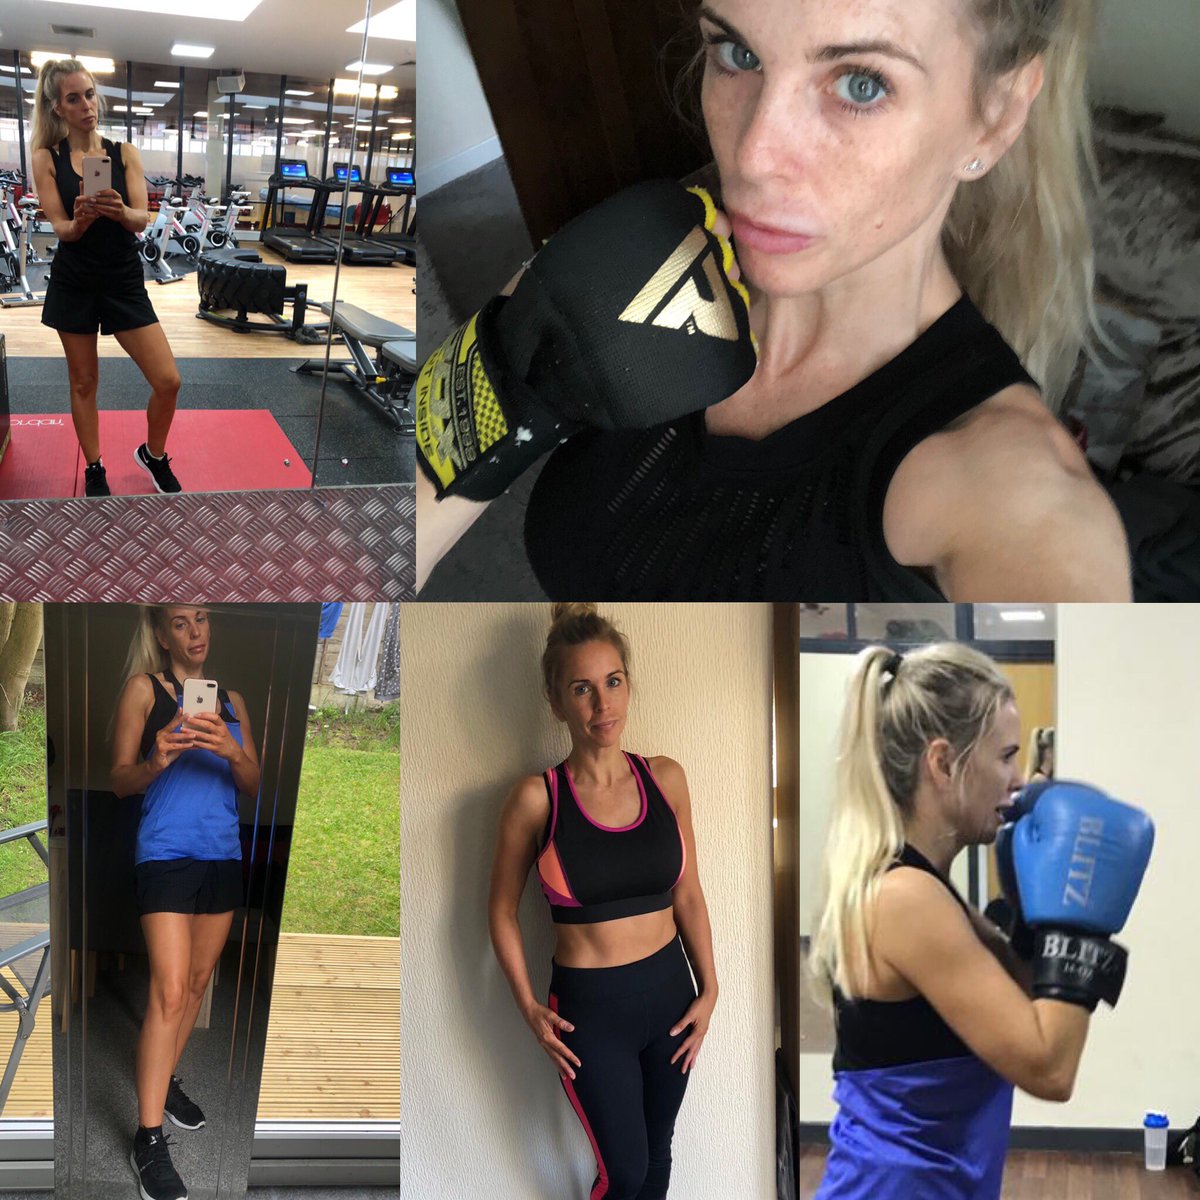 Looking to turn my hobby for fitness/training into something more. Can anyone recommend a place where I can do a course part time in the evenings alongside my day job? @gymkingwomen #boxersize #personaltrainingcourse #gymlife #weighttraining #brandambassador #40plus #nevertooold